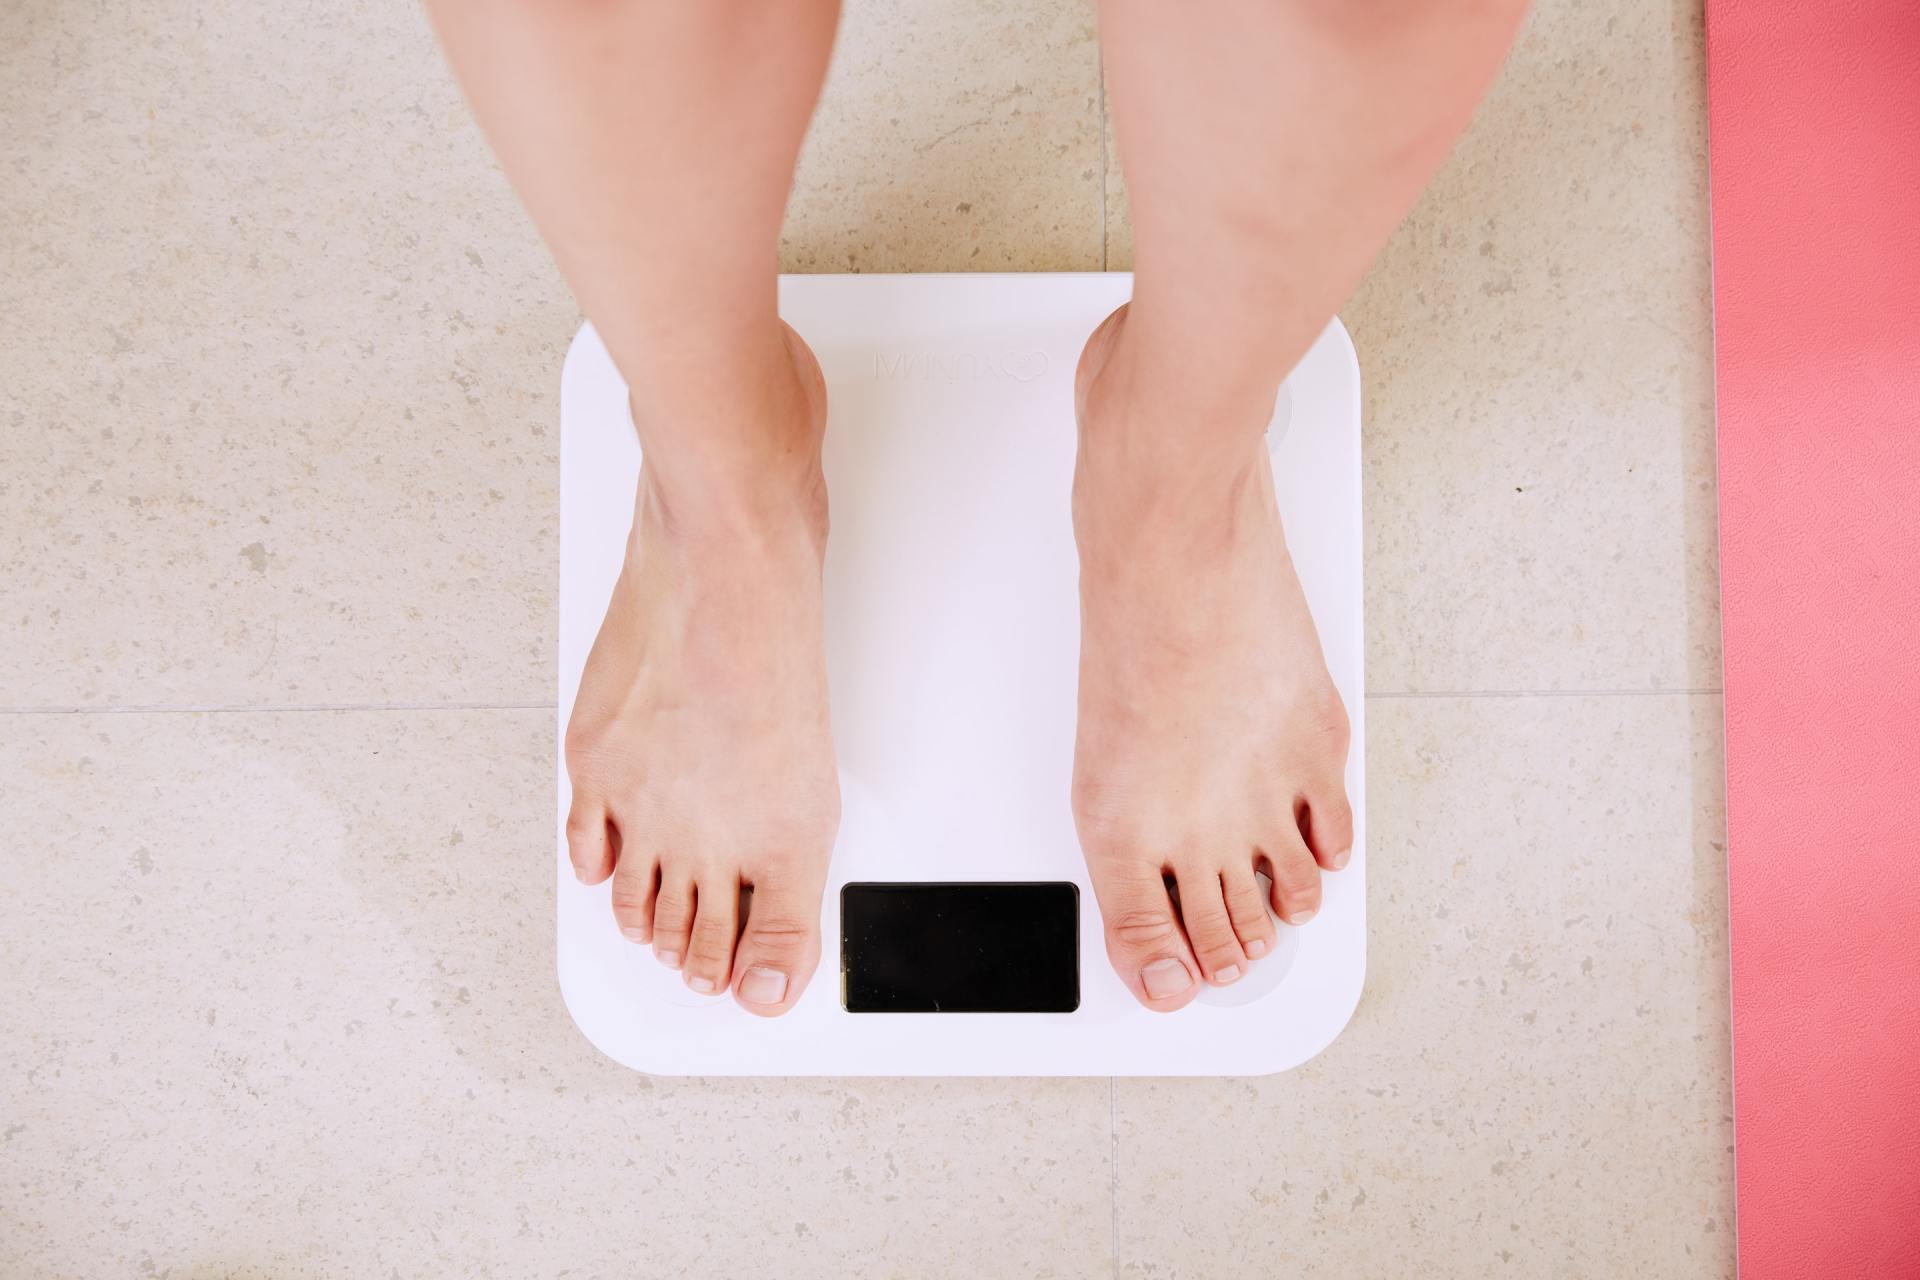 Is Rapid Weight Loss Healthy?